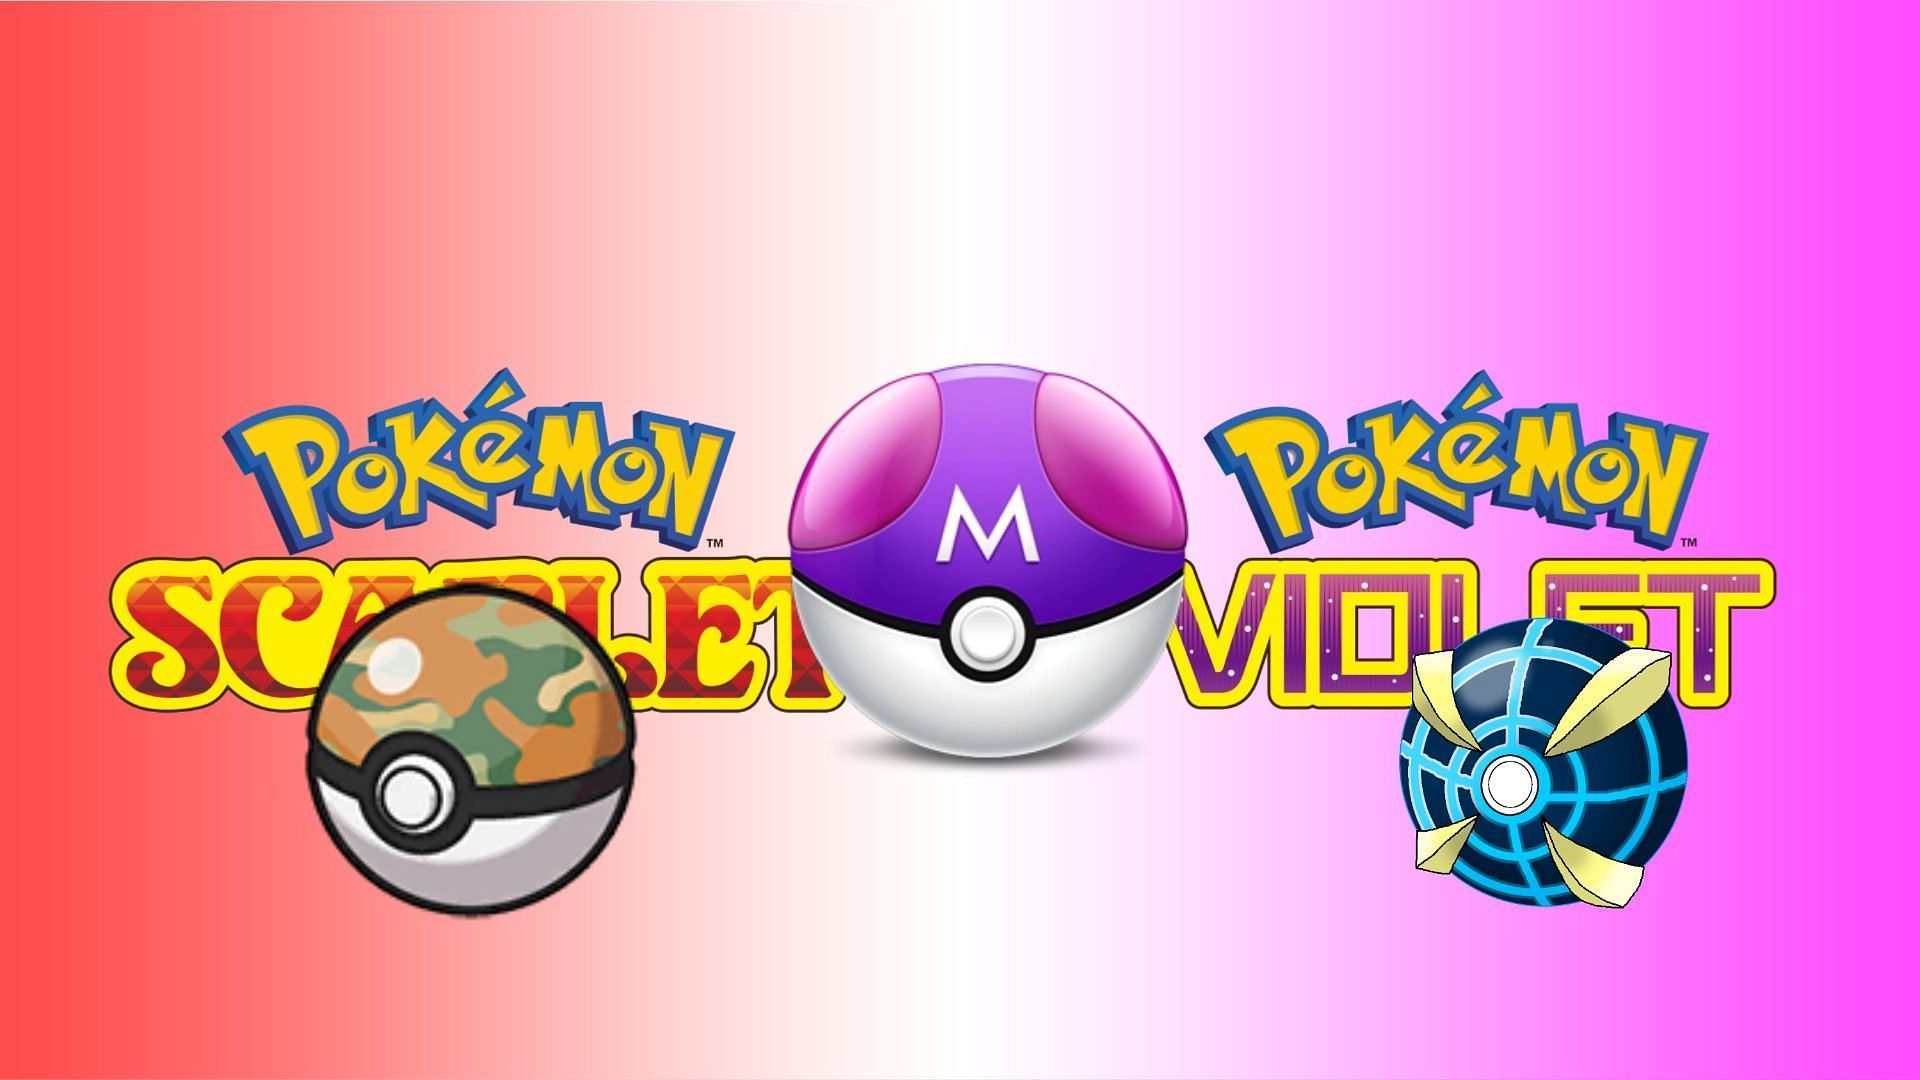 How to Get the Beast Ball in Scarlet & Violet - Items - Tips and